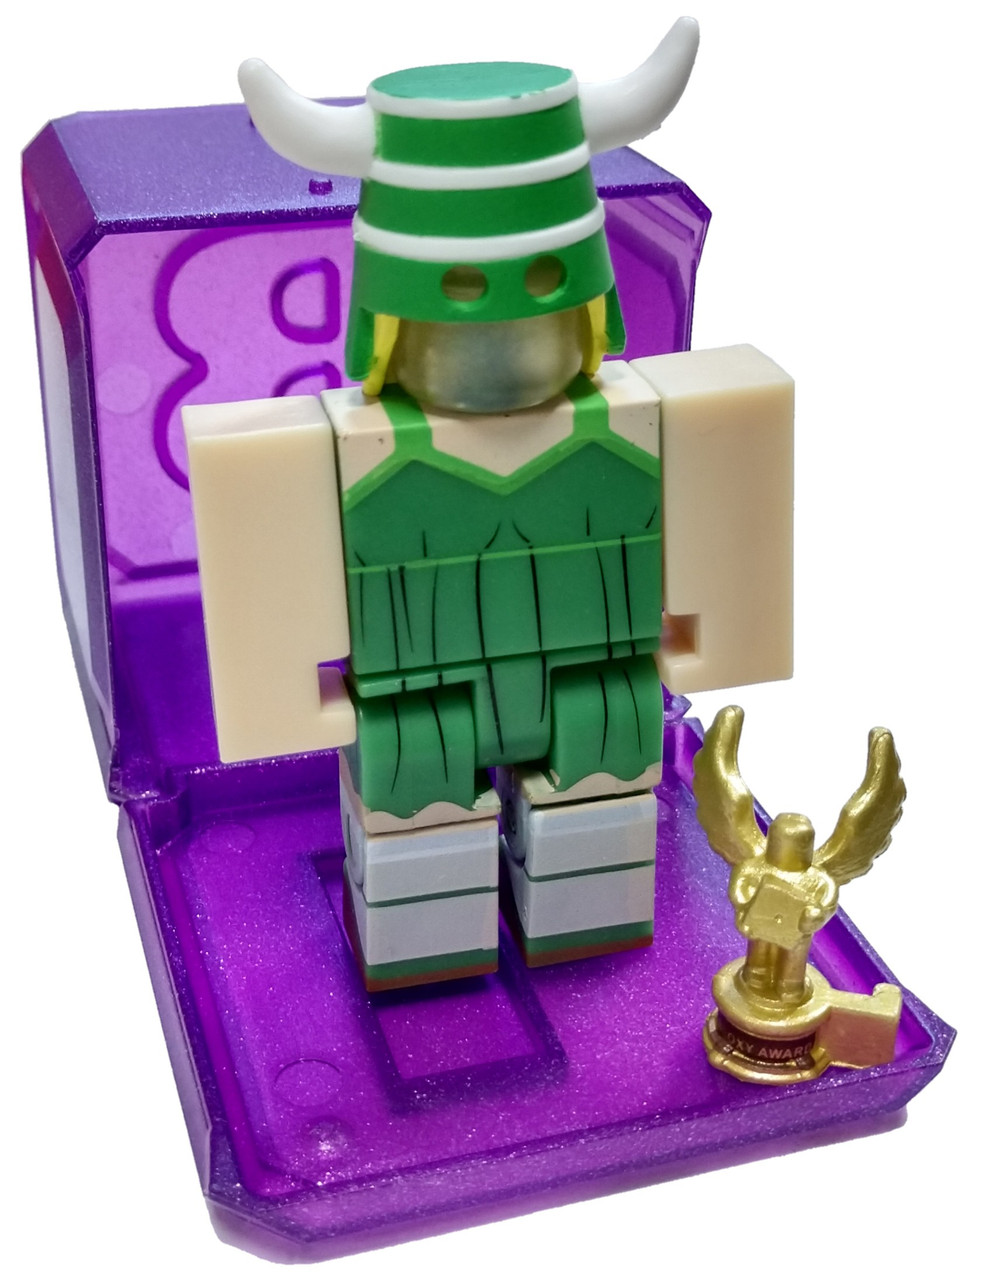 Roblox Celebrity Collection Series 3 Missshu 3 Mini Figure With Cube And Online Code Loose Jazwares Toywiz - celebrity collection series 3 roblox high school nurse mini figure with cube and online code loose